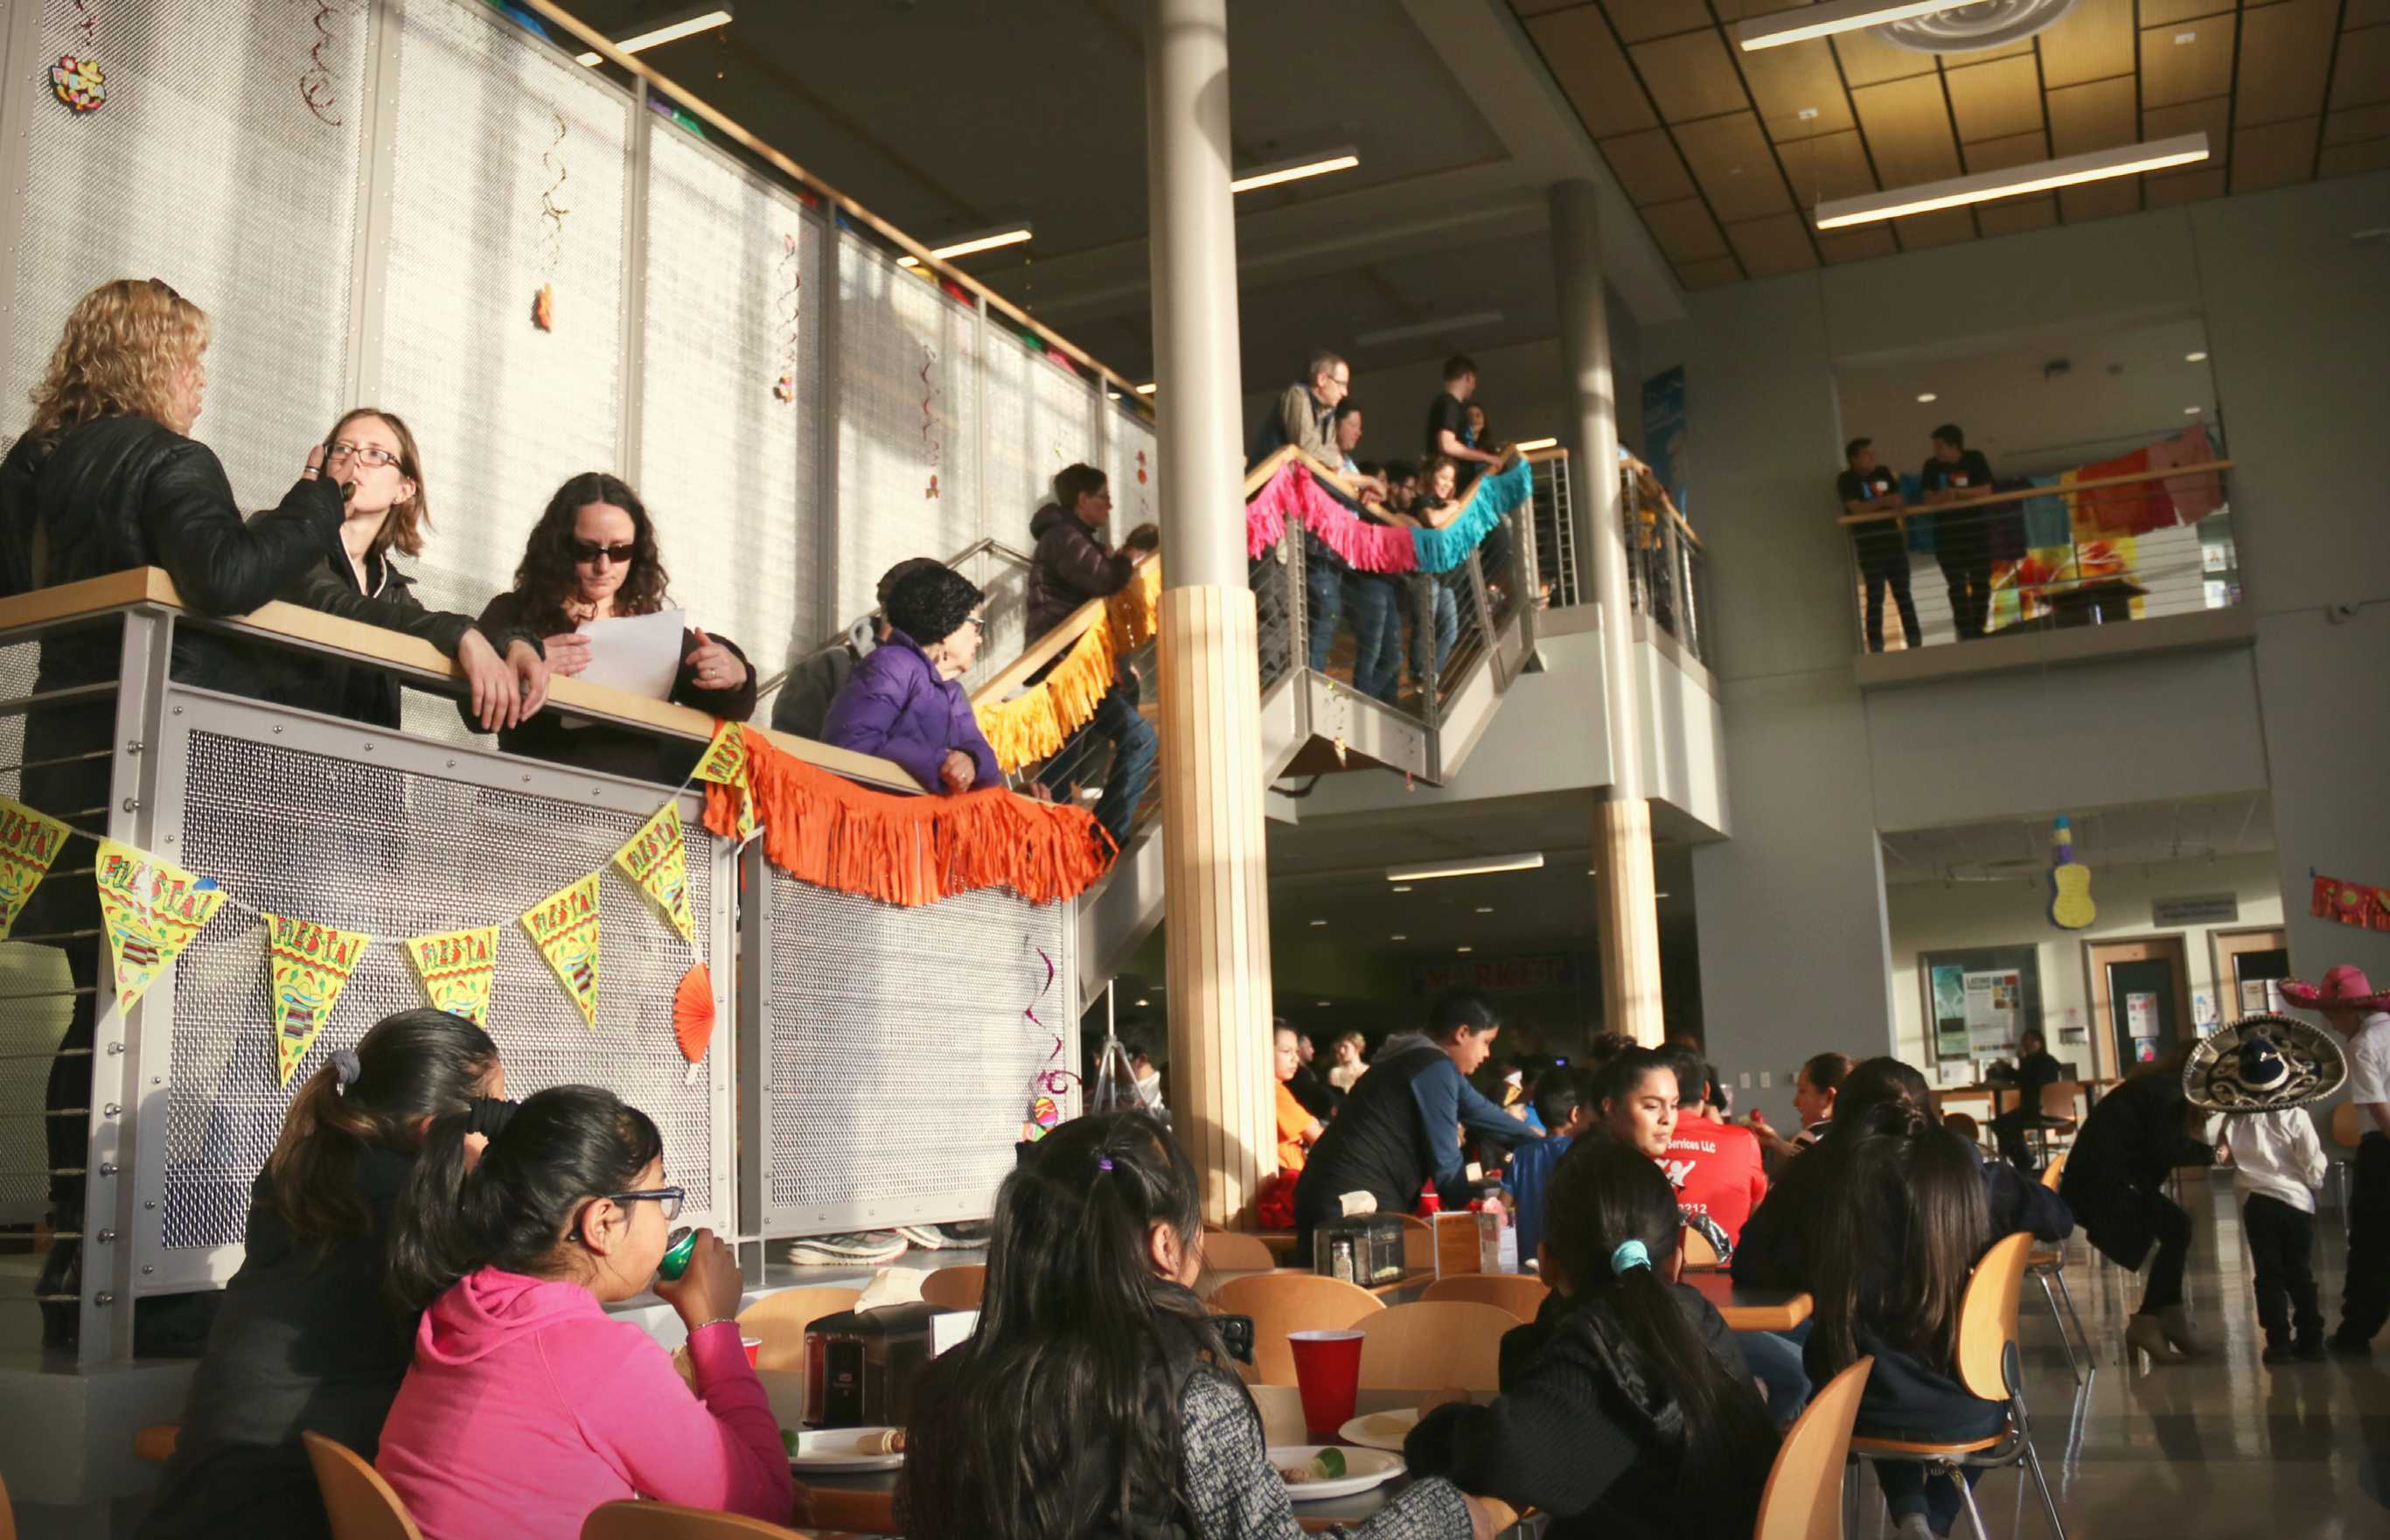 Attendees of the Latino Fiesta gather around cafeteria tables and on the stairs of the Campus Center to watch the dance performances.